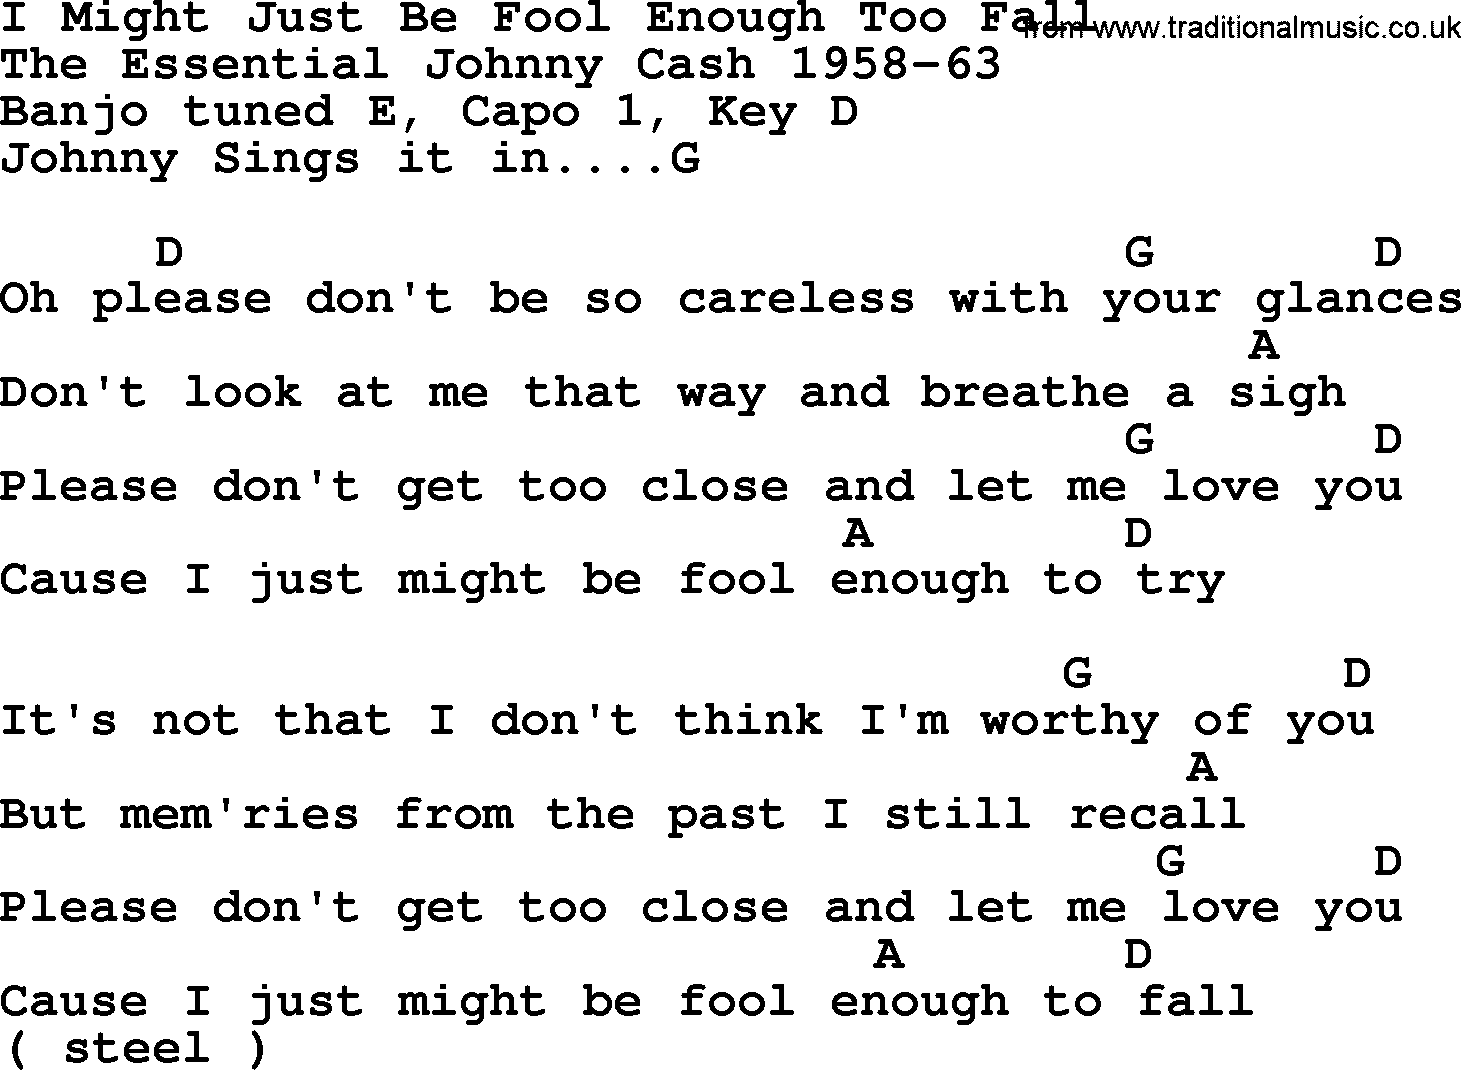 Johnny Cash song I Might Just Be Fool Enough Too Fall, lyrics and chords